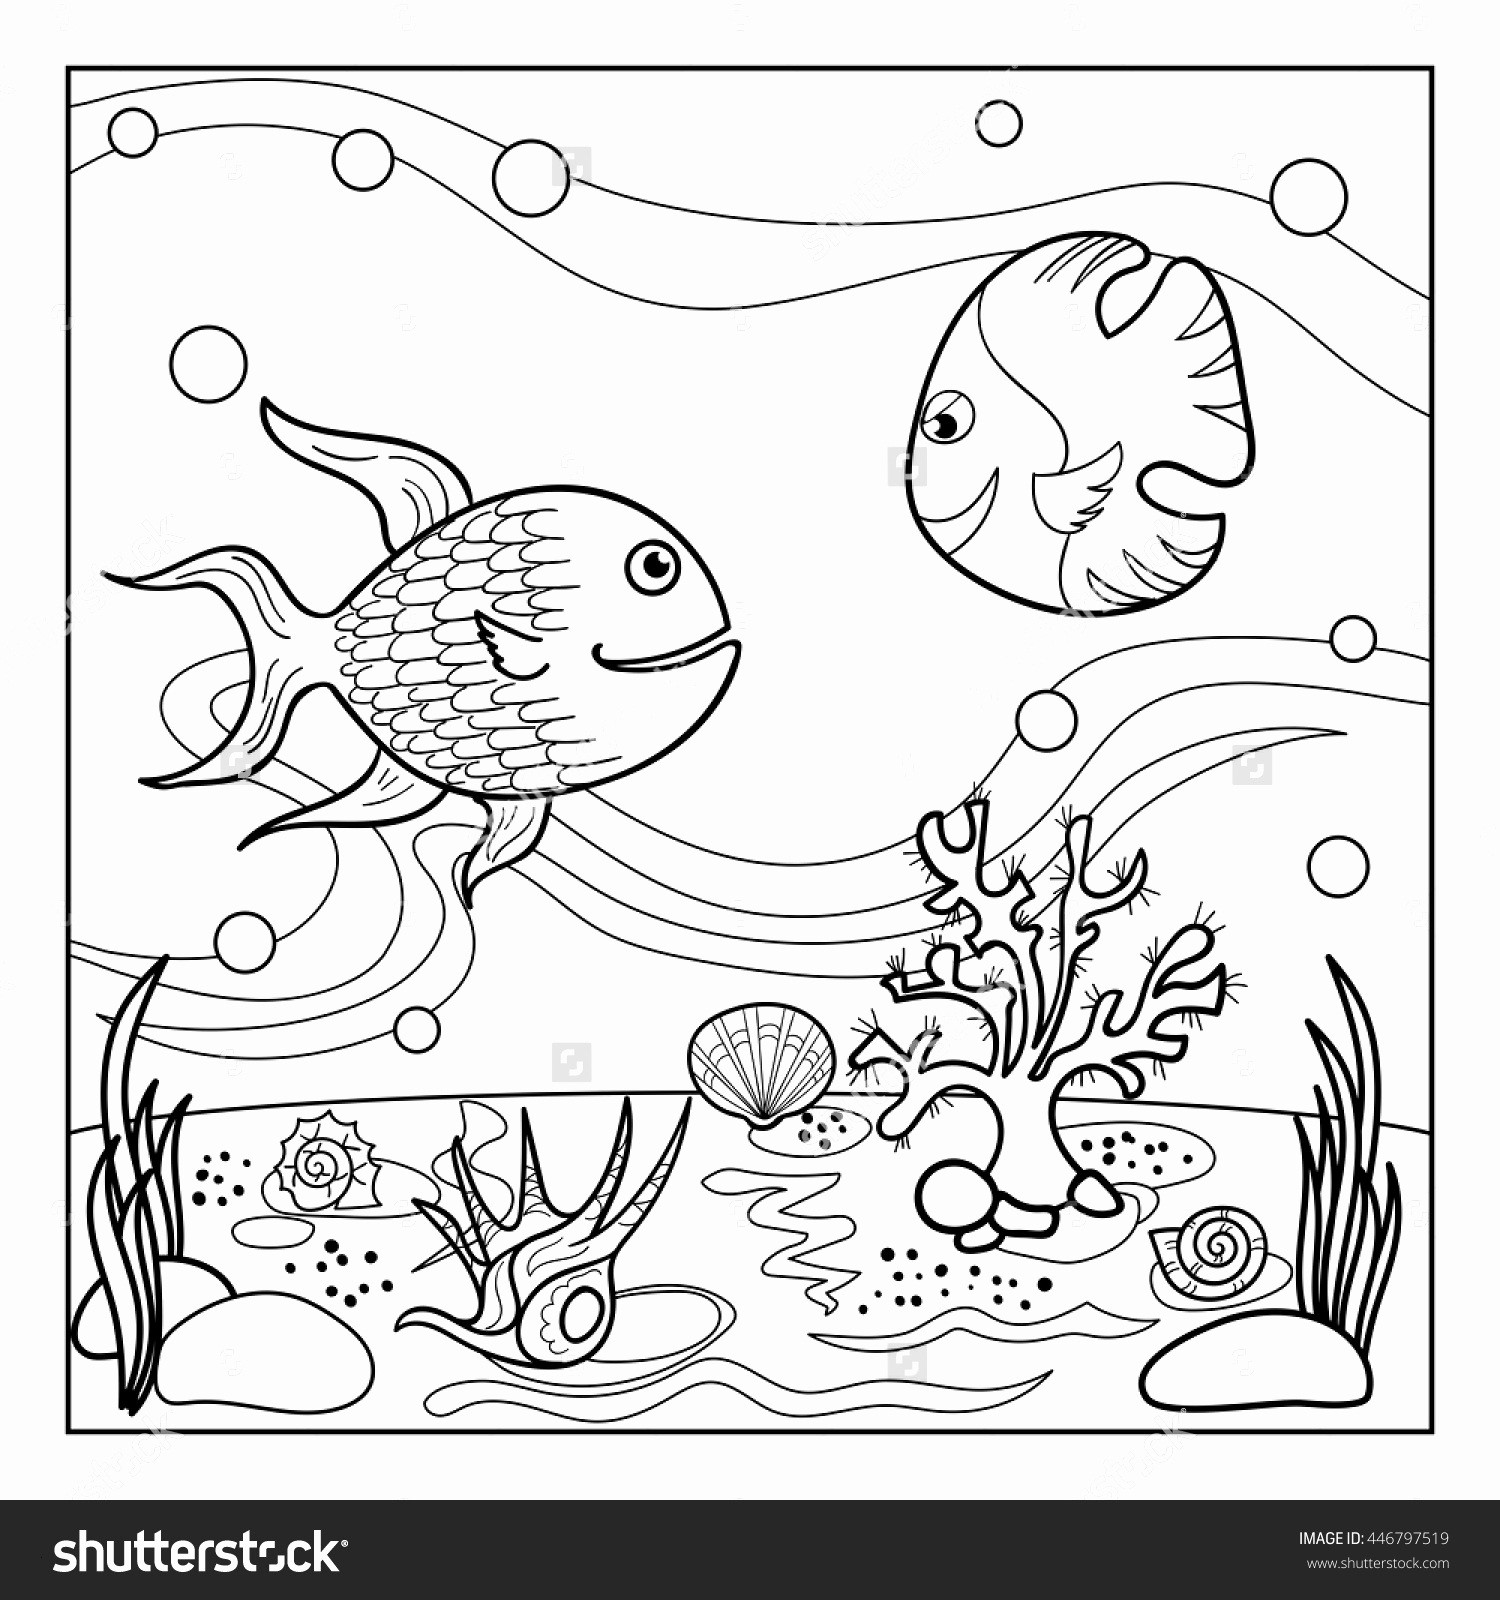 Pikachu Coloring Pages Lovely islamic Coloring Pages Printable Free 25 Luxury islamic Coloring